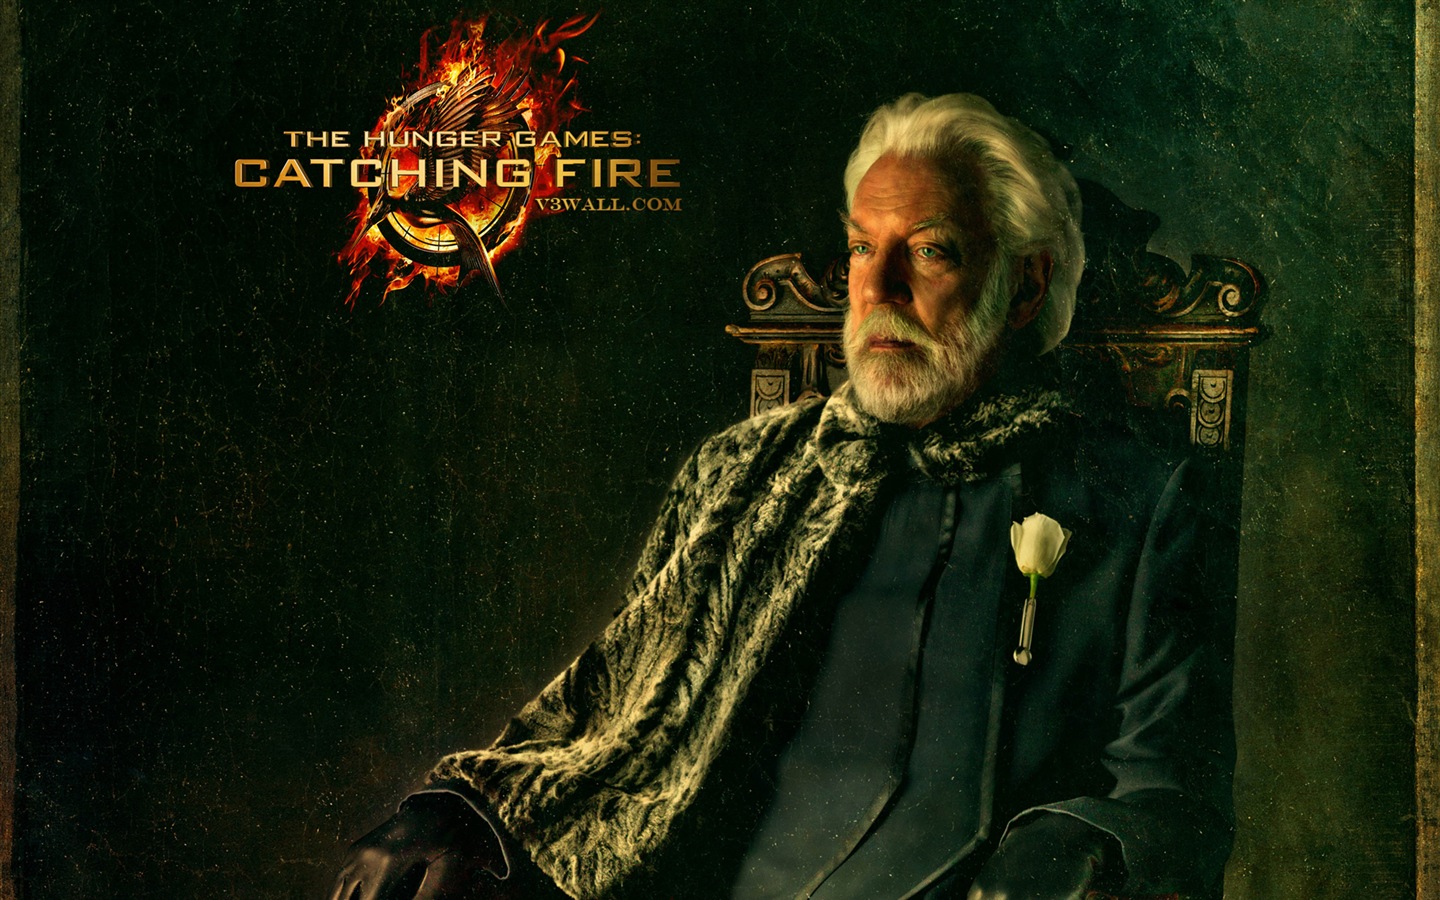 The Hunger Games: Catching Fire wallpapers HD #3 - 1440x900